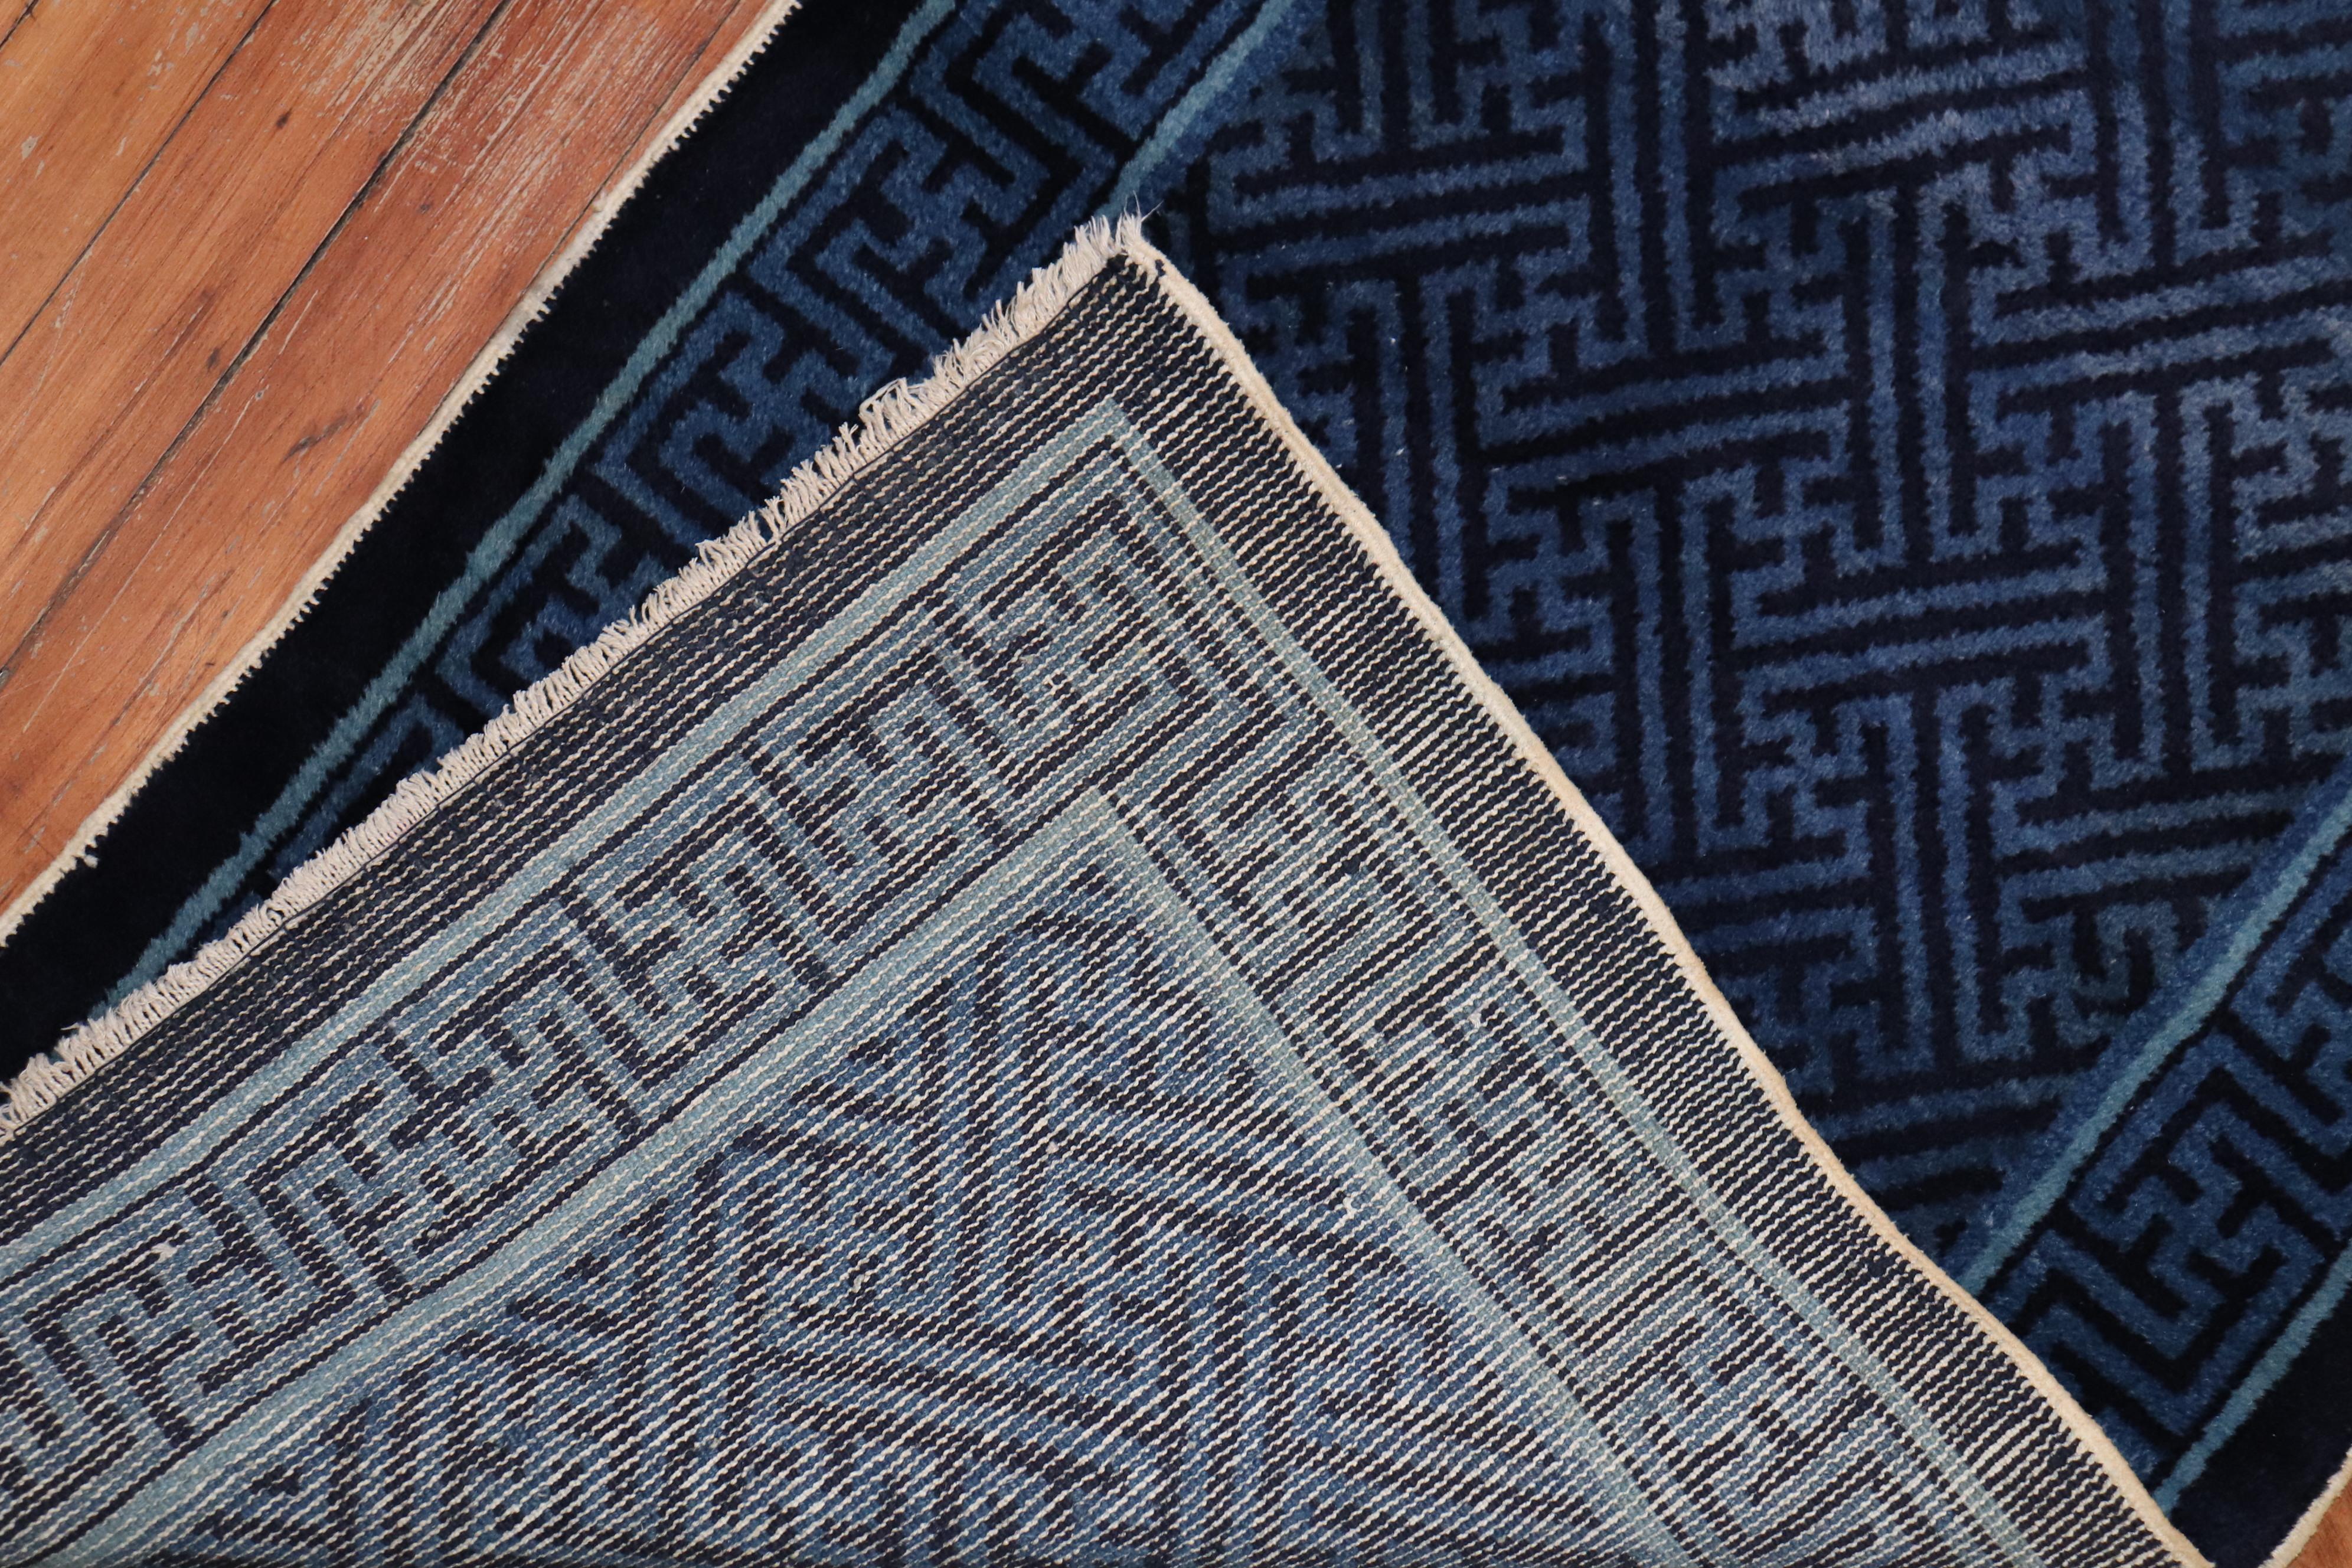 Rare blue 2-tone Chinese narrow runner from the middle of the 20th century. Repetitive Design in field and border. The condition is excellent

Measures: 2'4